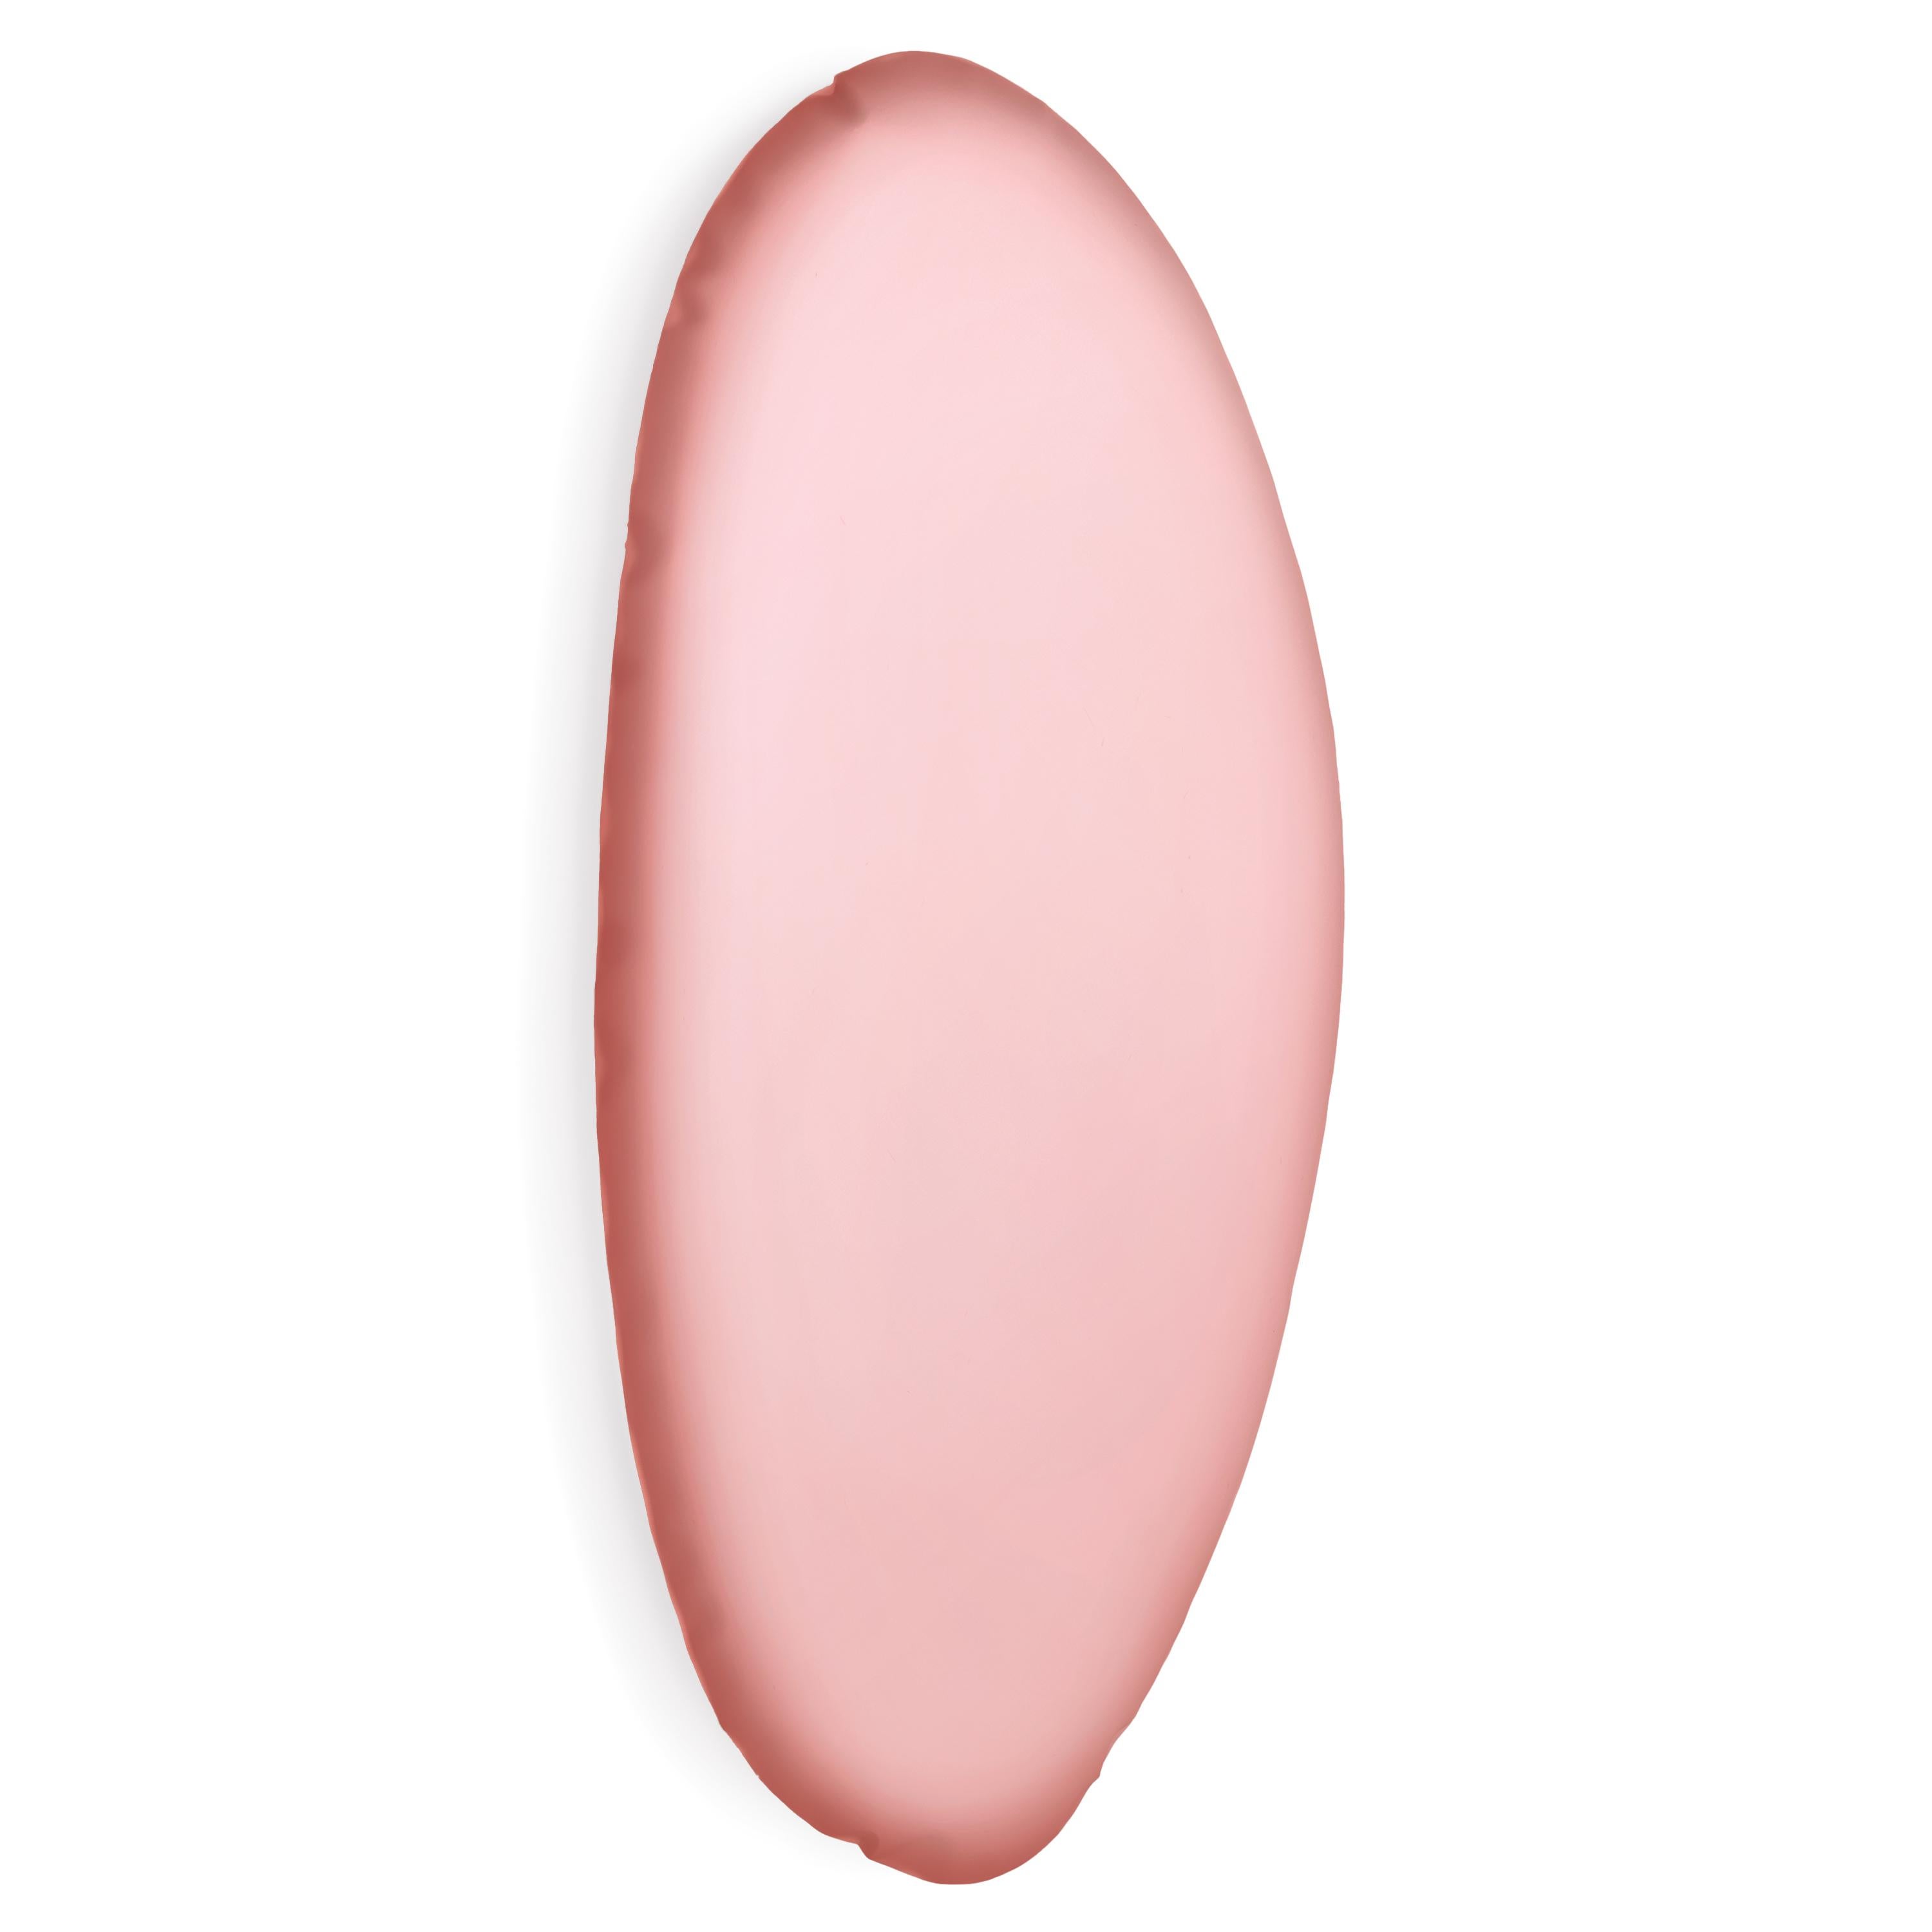 Powder-Coated Contemporary Pink Wall Sculpture 'Tafla O4', Cotton Candy Collection by Zieta For Sale